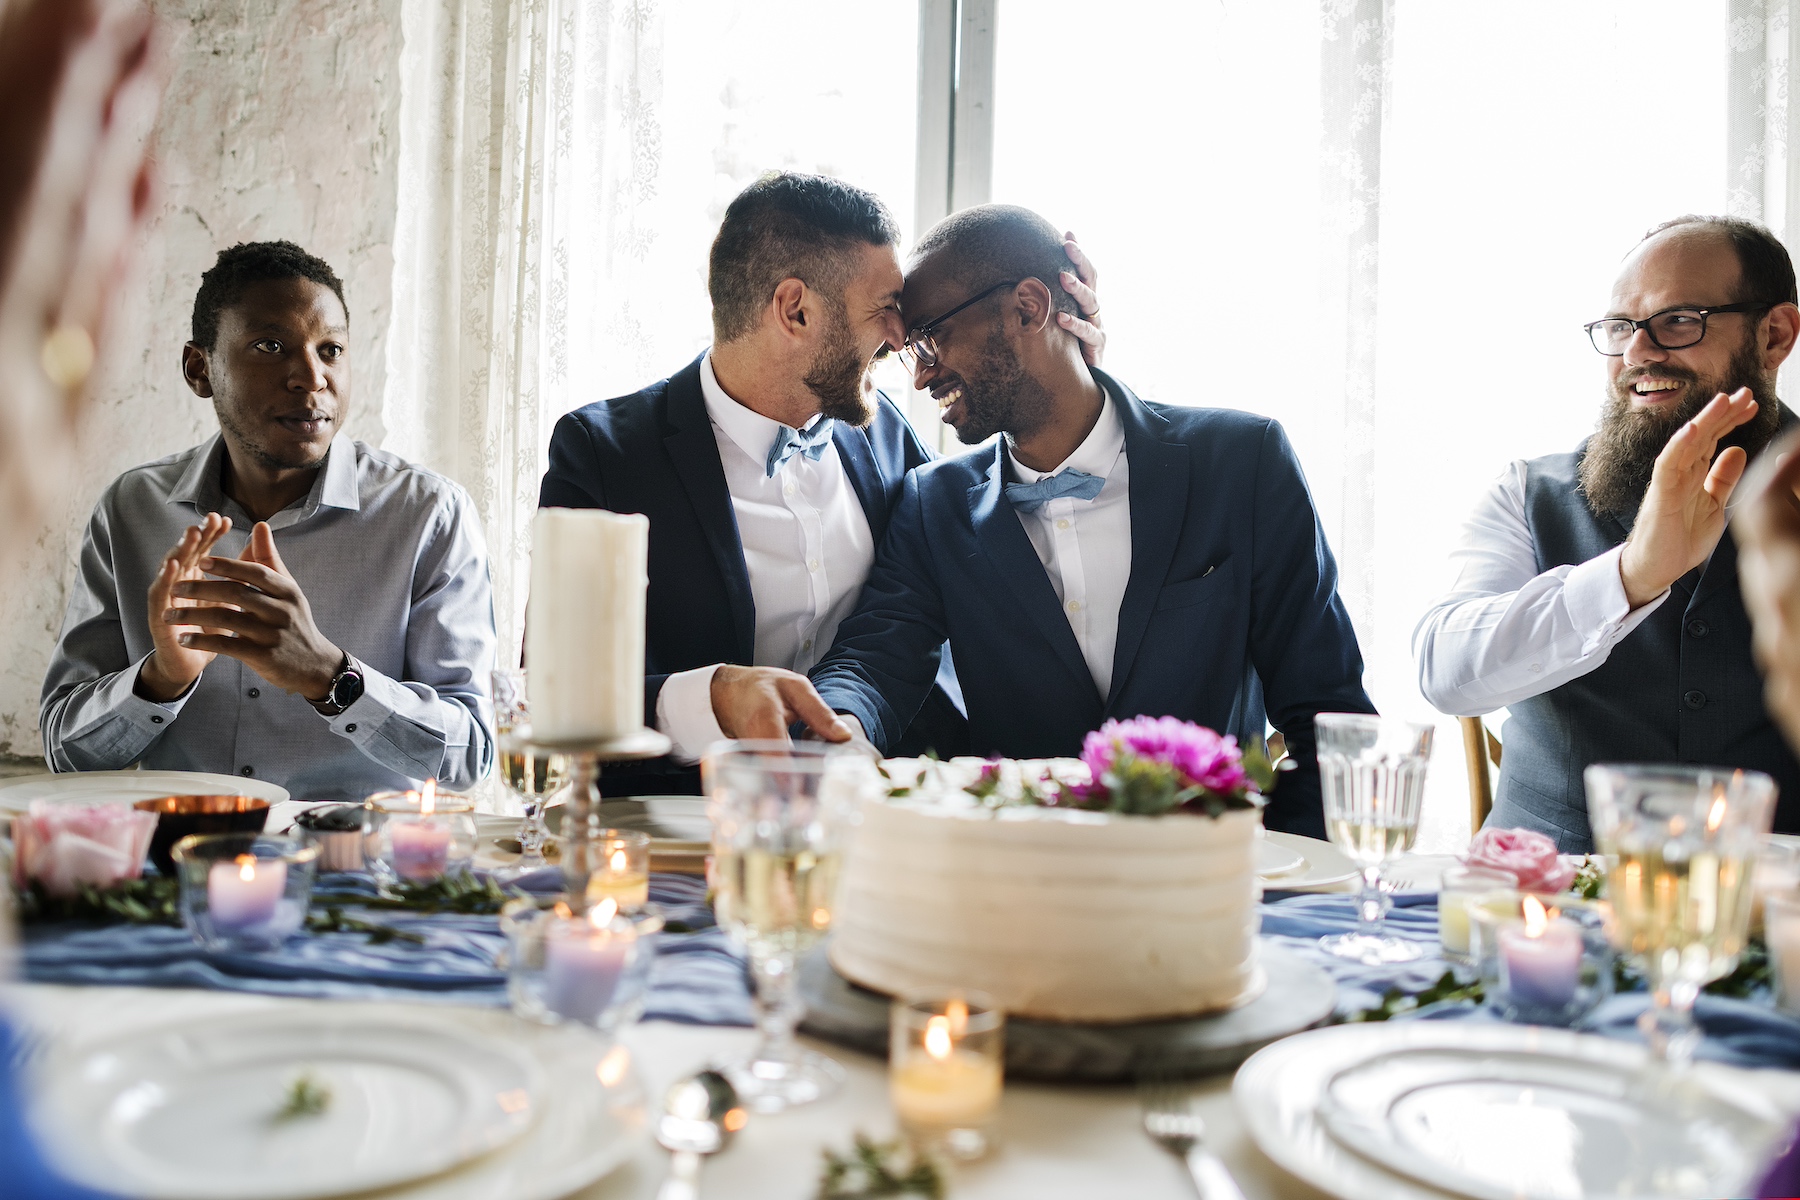 Two grooms sit at a wedding reception table gently cutting the cake and embracing